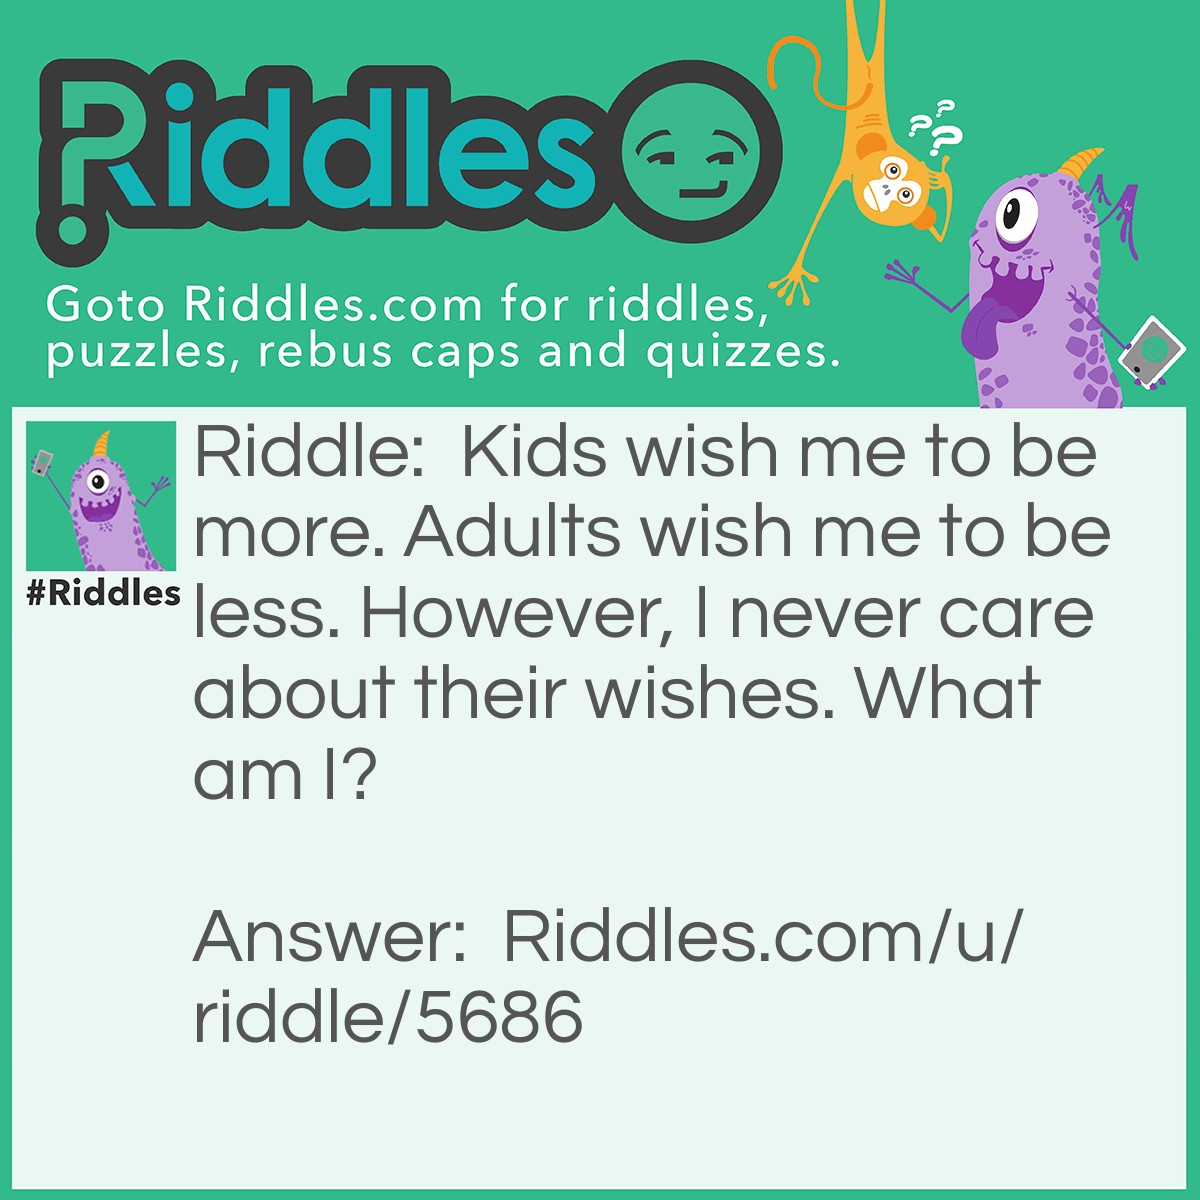 Riddle: Kids wish me to be more. Adults wish me to be less. However, I never care about their wishes. What am I? Answer: Age.